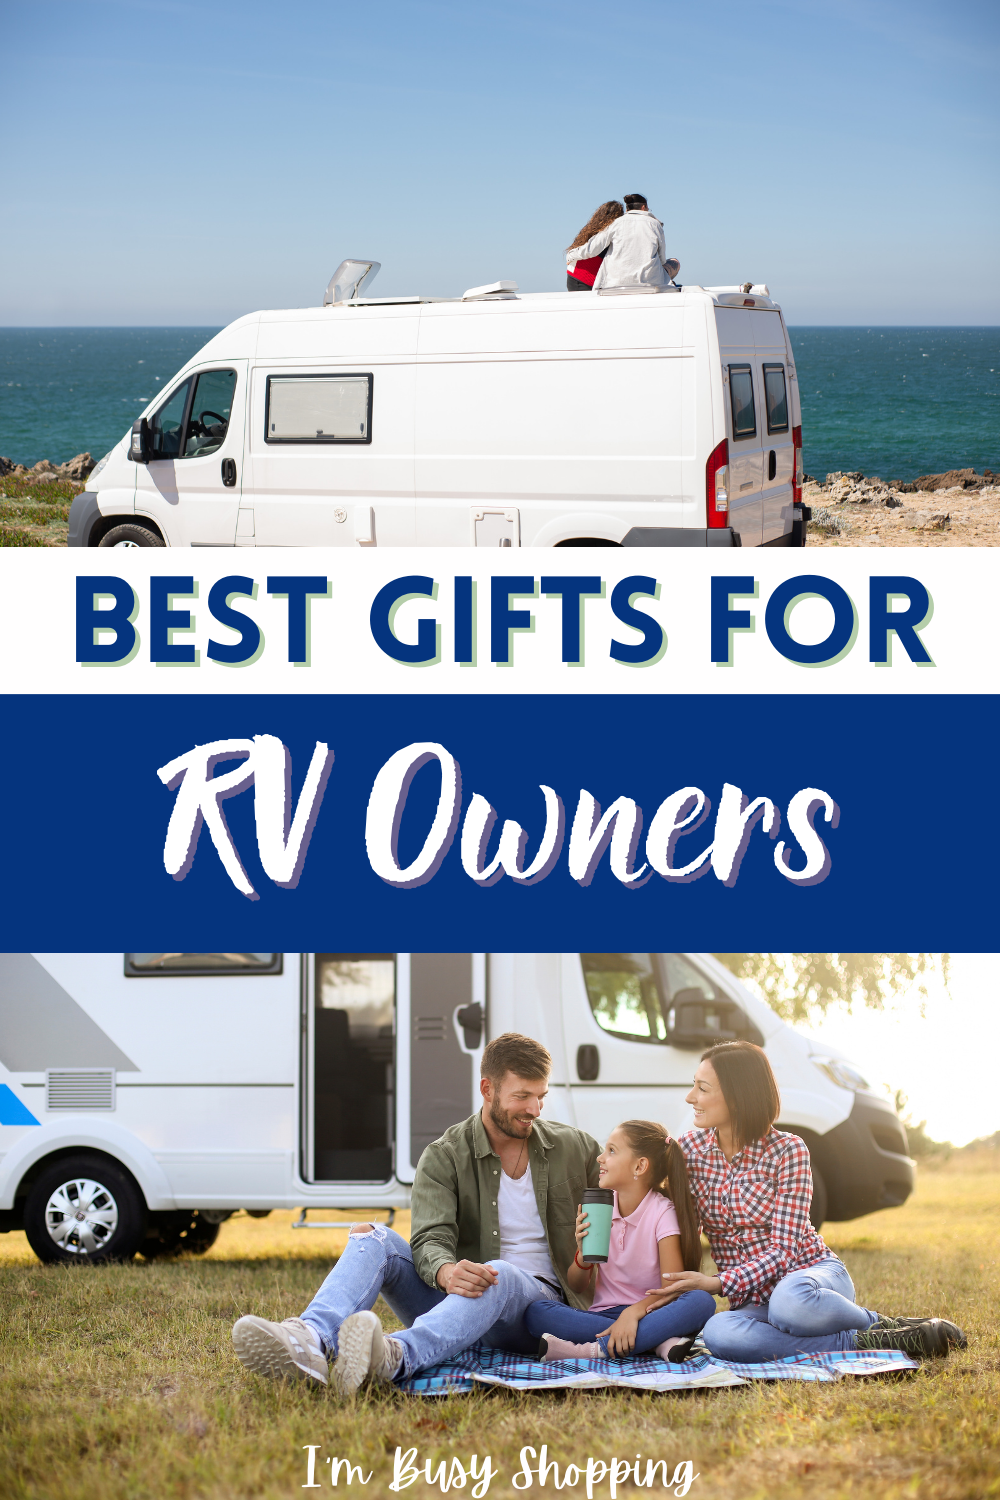 Pin image with title "Best Gifts for RV Owners" showing a photo of a white RV by the sea and a family of three camping out outside an RV